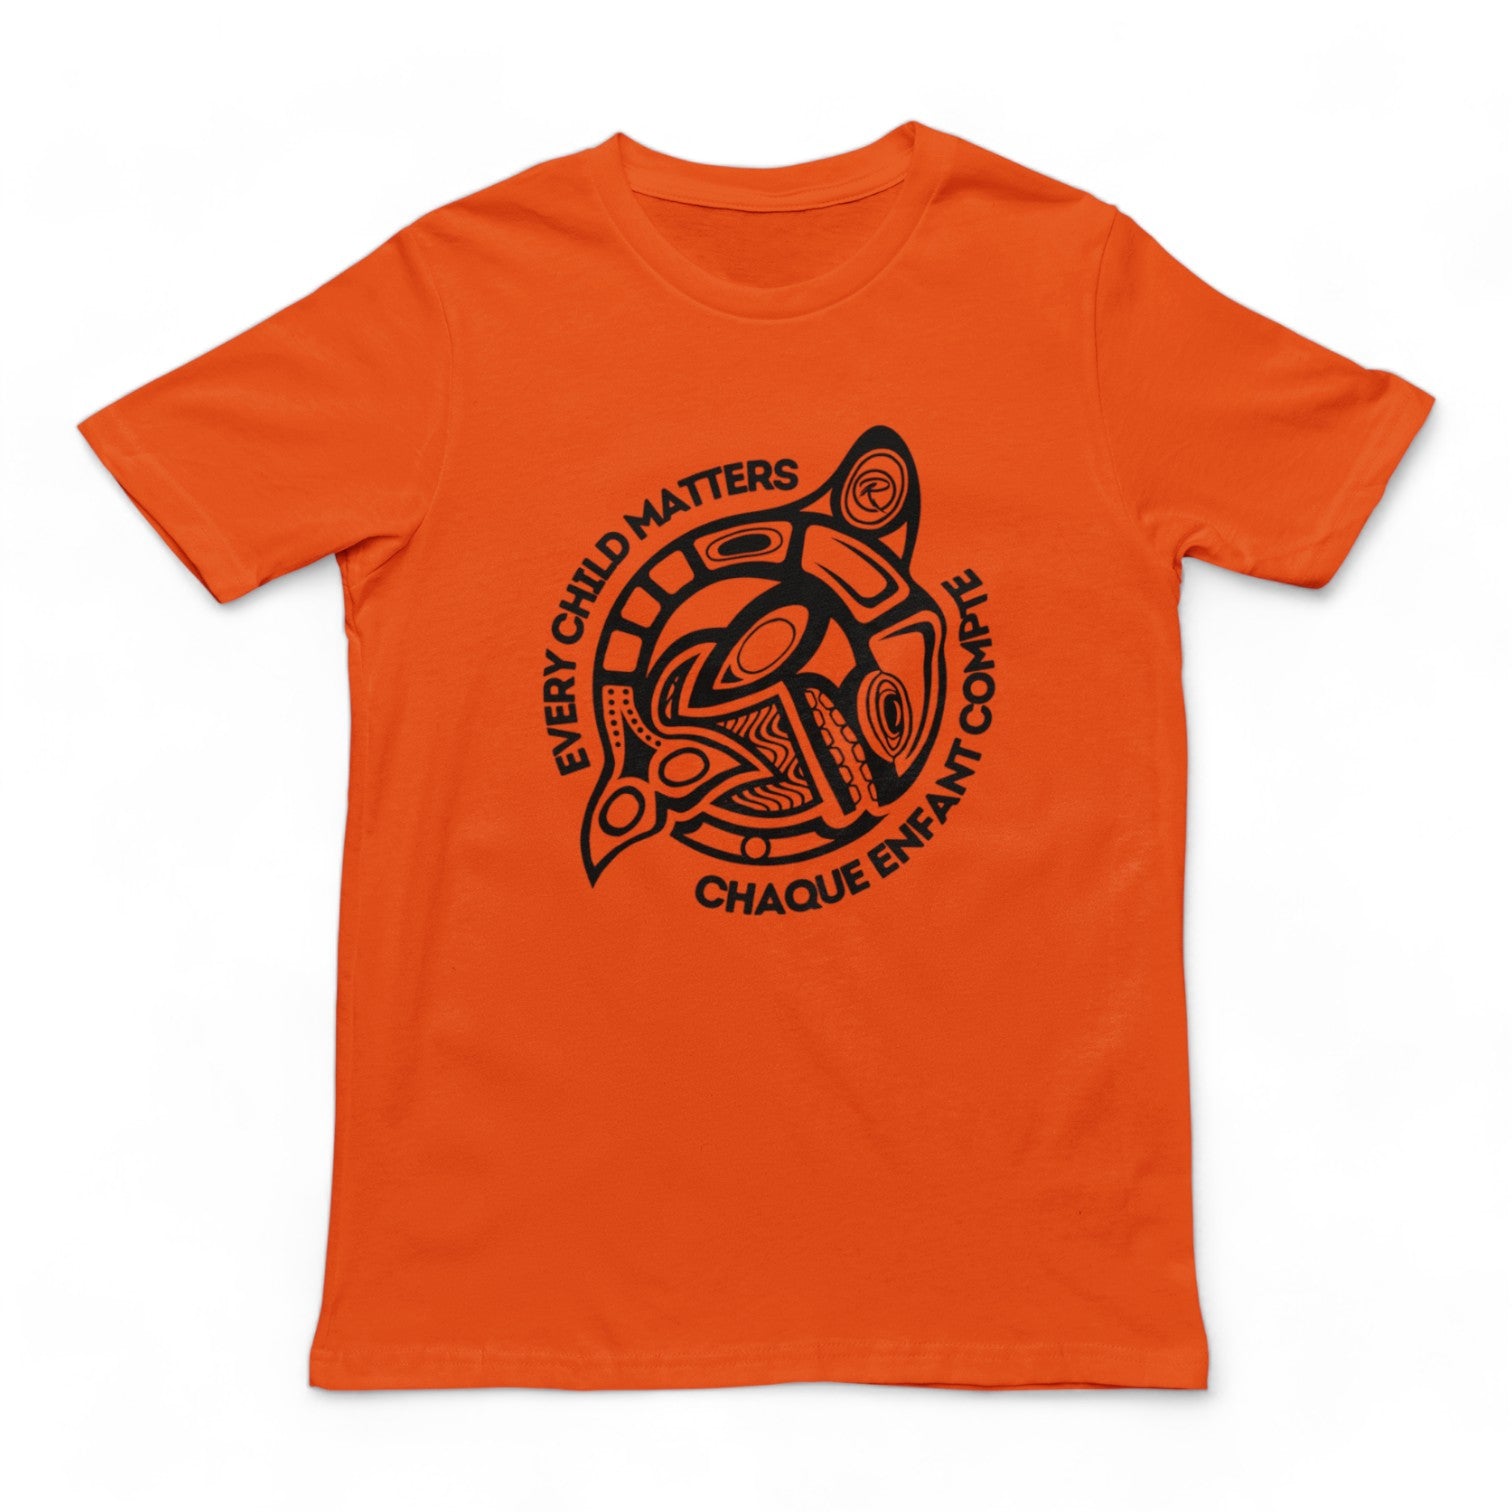 Every Child Matters 'ORCA' T-shirt (Youth)